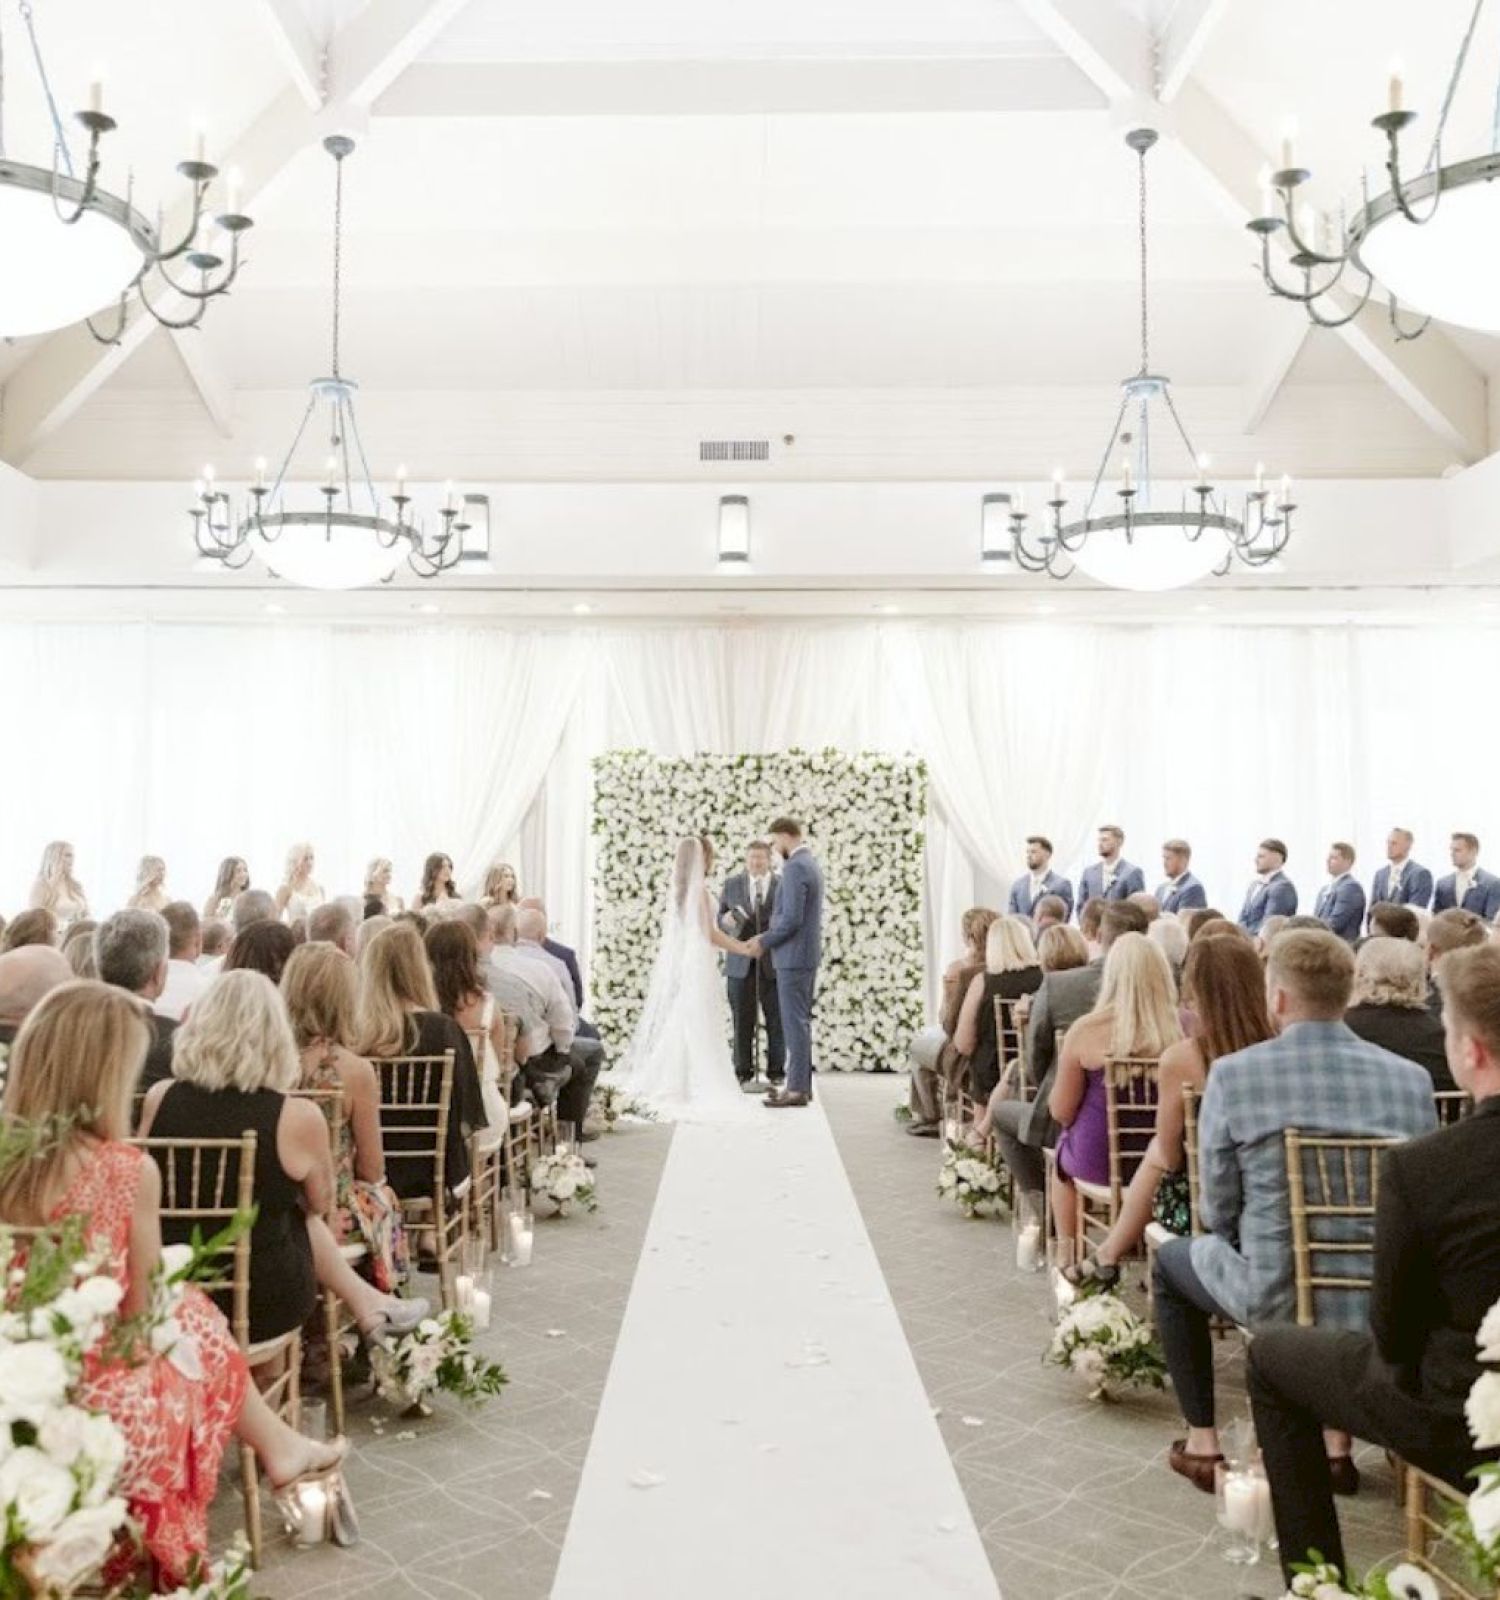 A wedding ceremony with a couple at the altar, bridesmaids and groomsmen on either side, and guests seated facing forward.